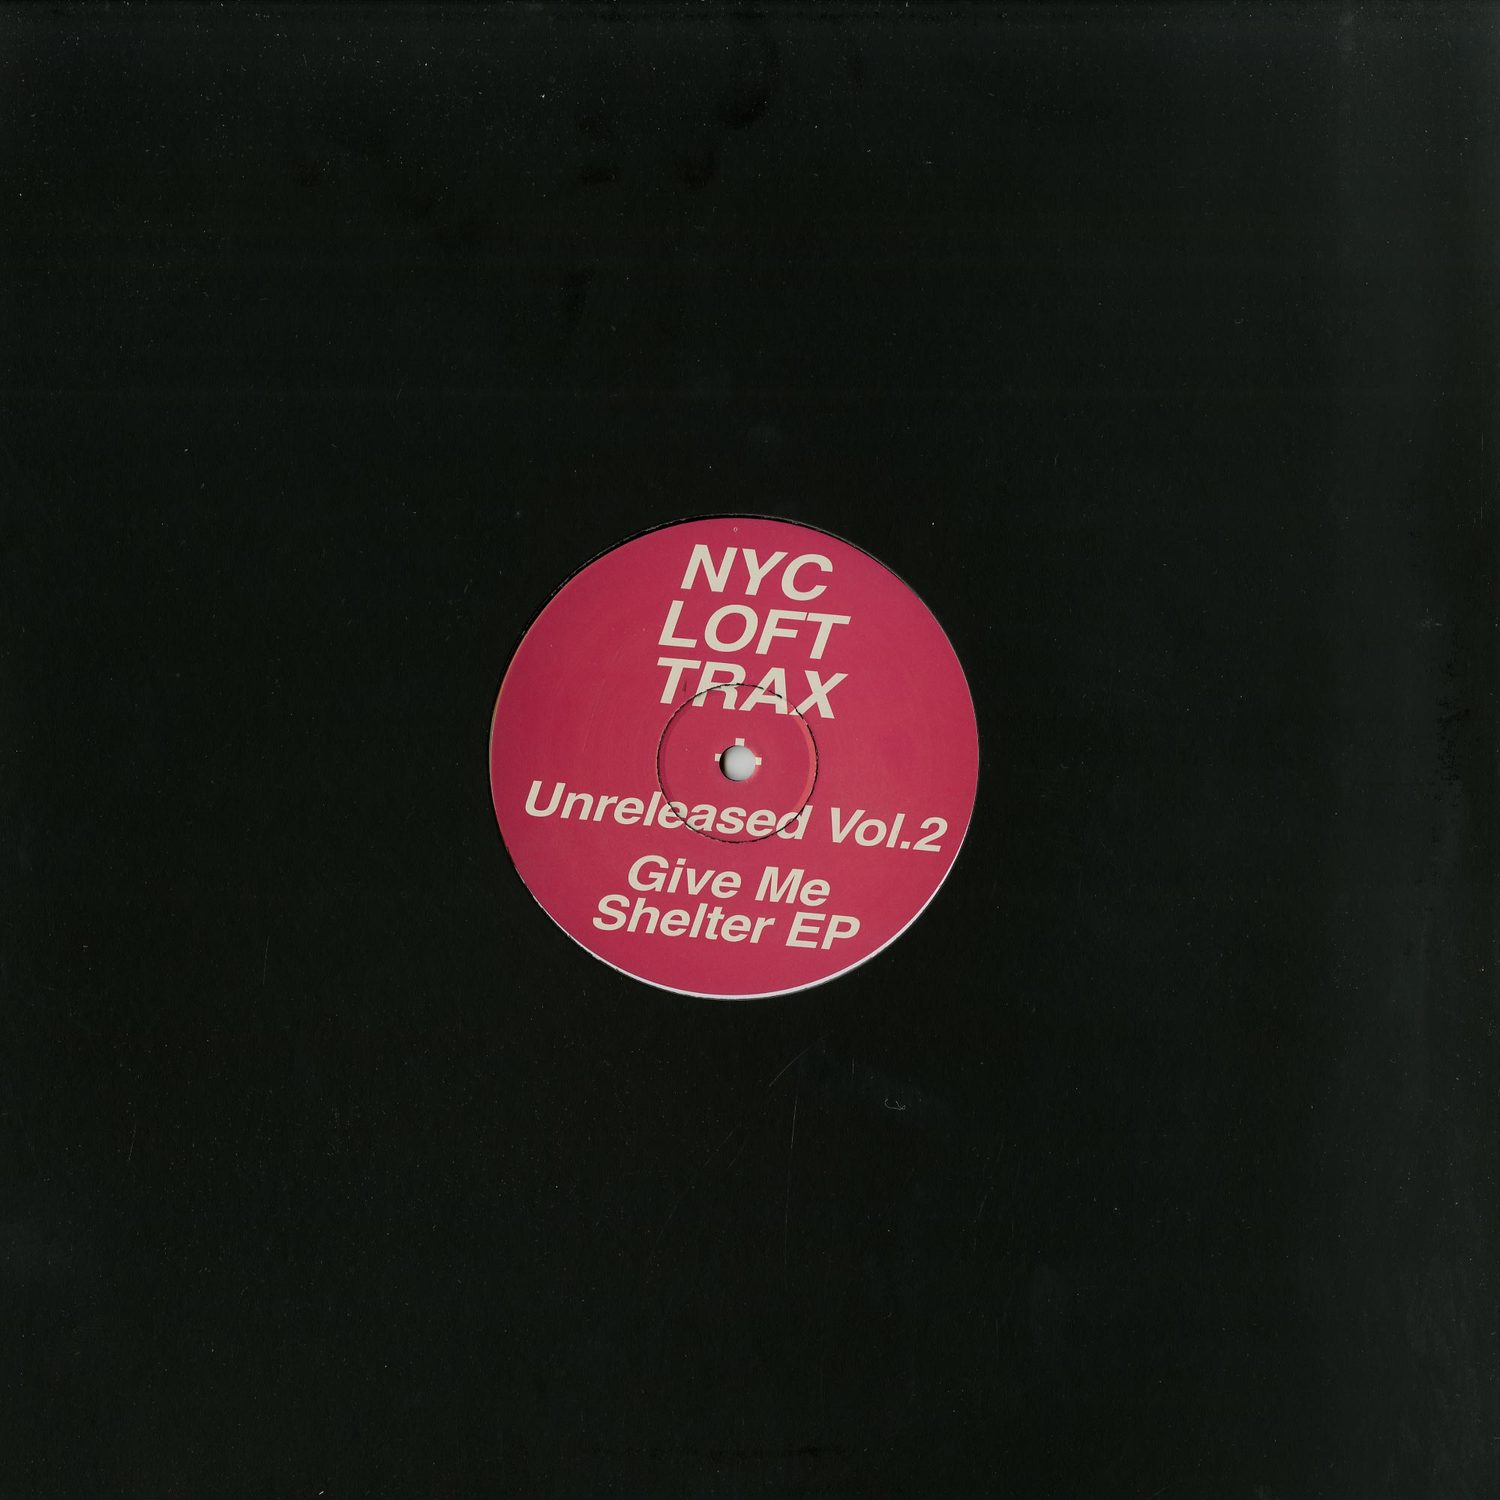 NYC Loft Trax - NYC LOFT TRAX UNRELEASED V2 - GIVE ME SHELTER EP